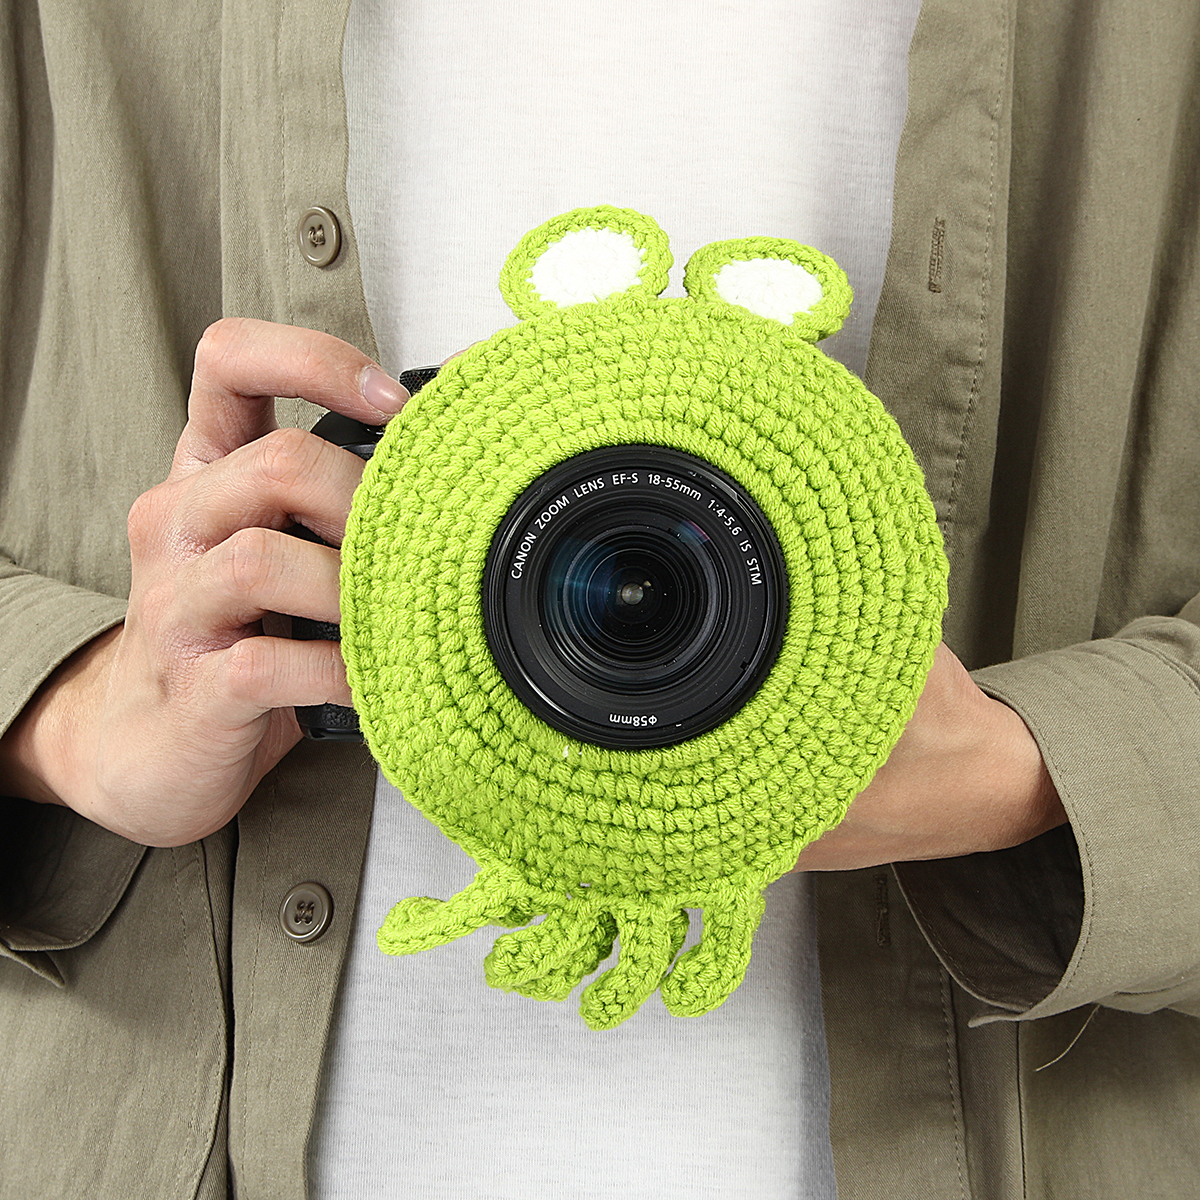 Hand-knitted-Wool-Decor-Case-For-Camera-Lens-Decorative-Photo-Guide-Doll-Toys-For-Kids-1457648-5